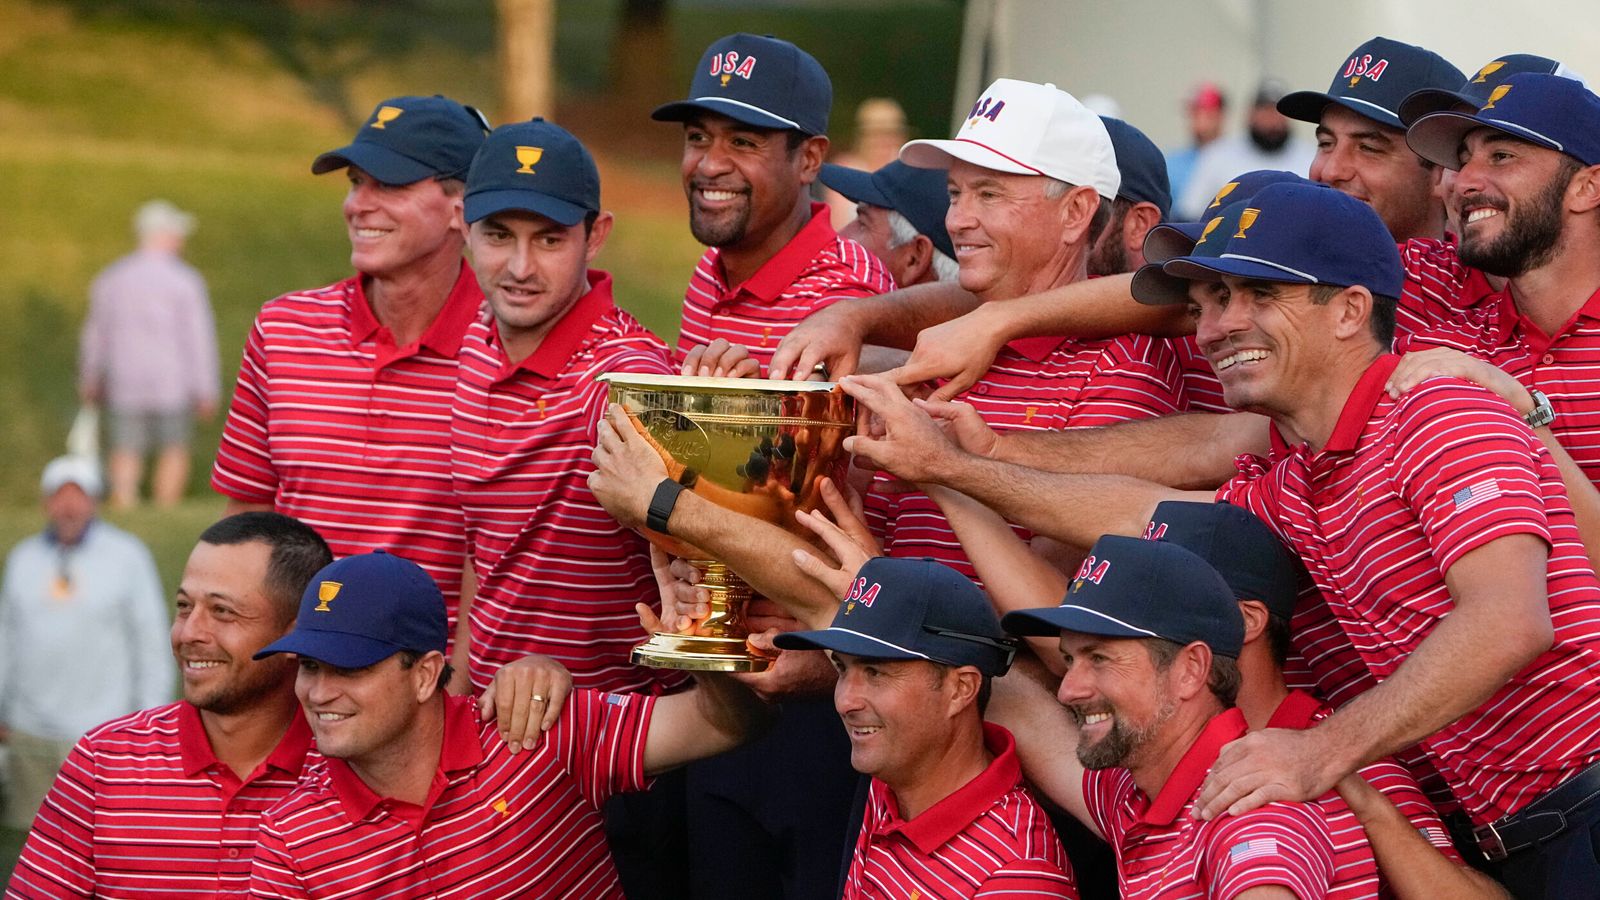 Presidents Cup Team USA secure ninth consecutive victory with win over